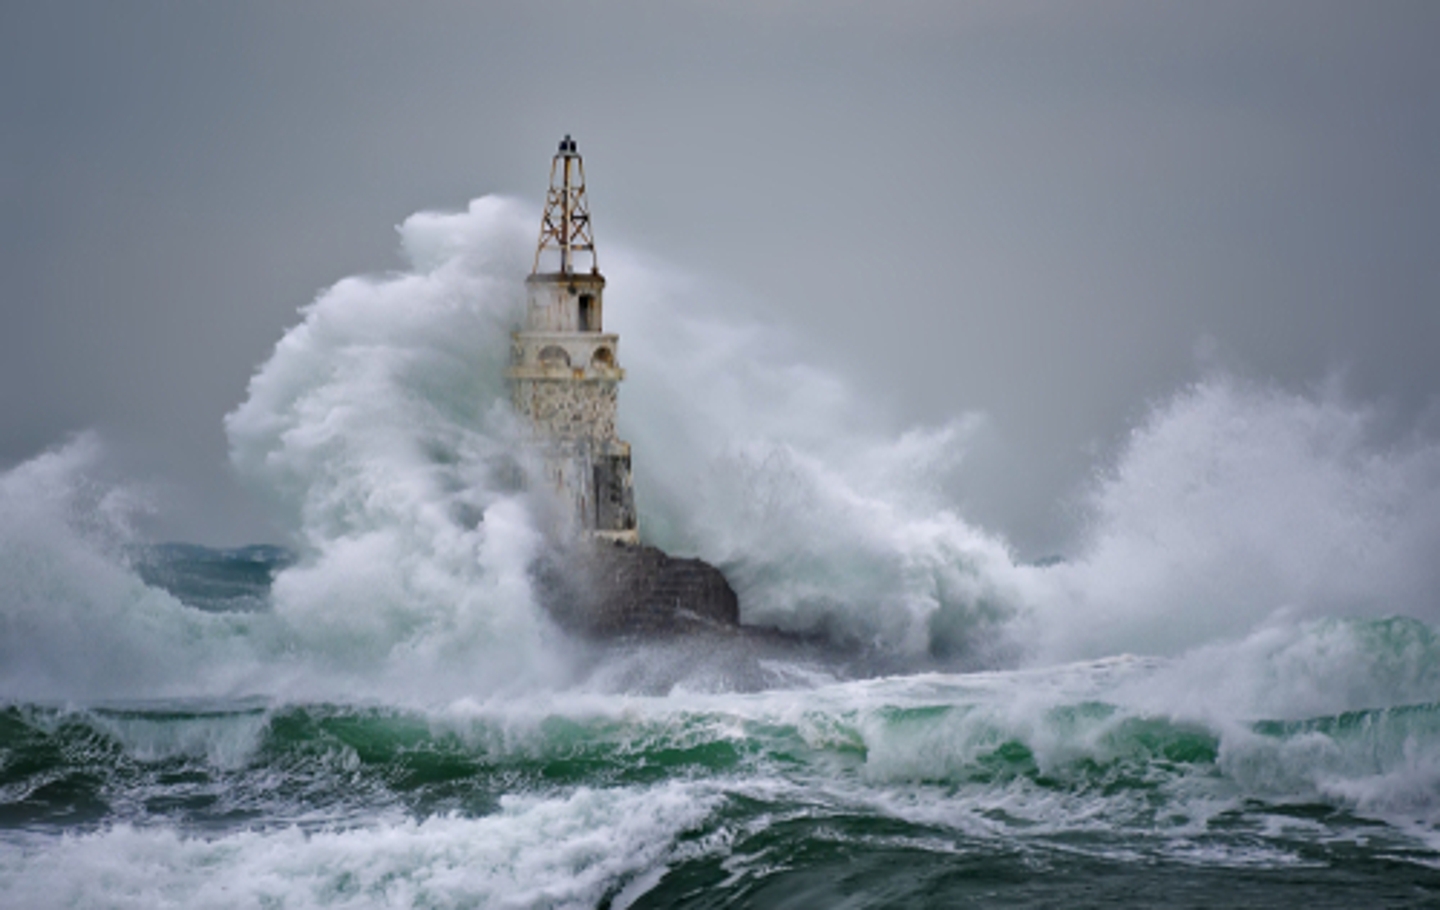 Stormy weather and thrashing water around lighthouse